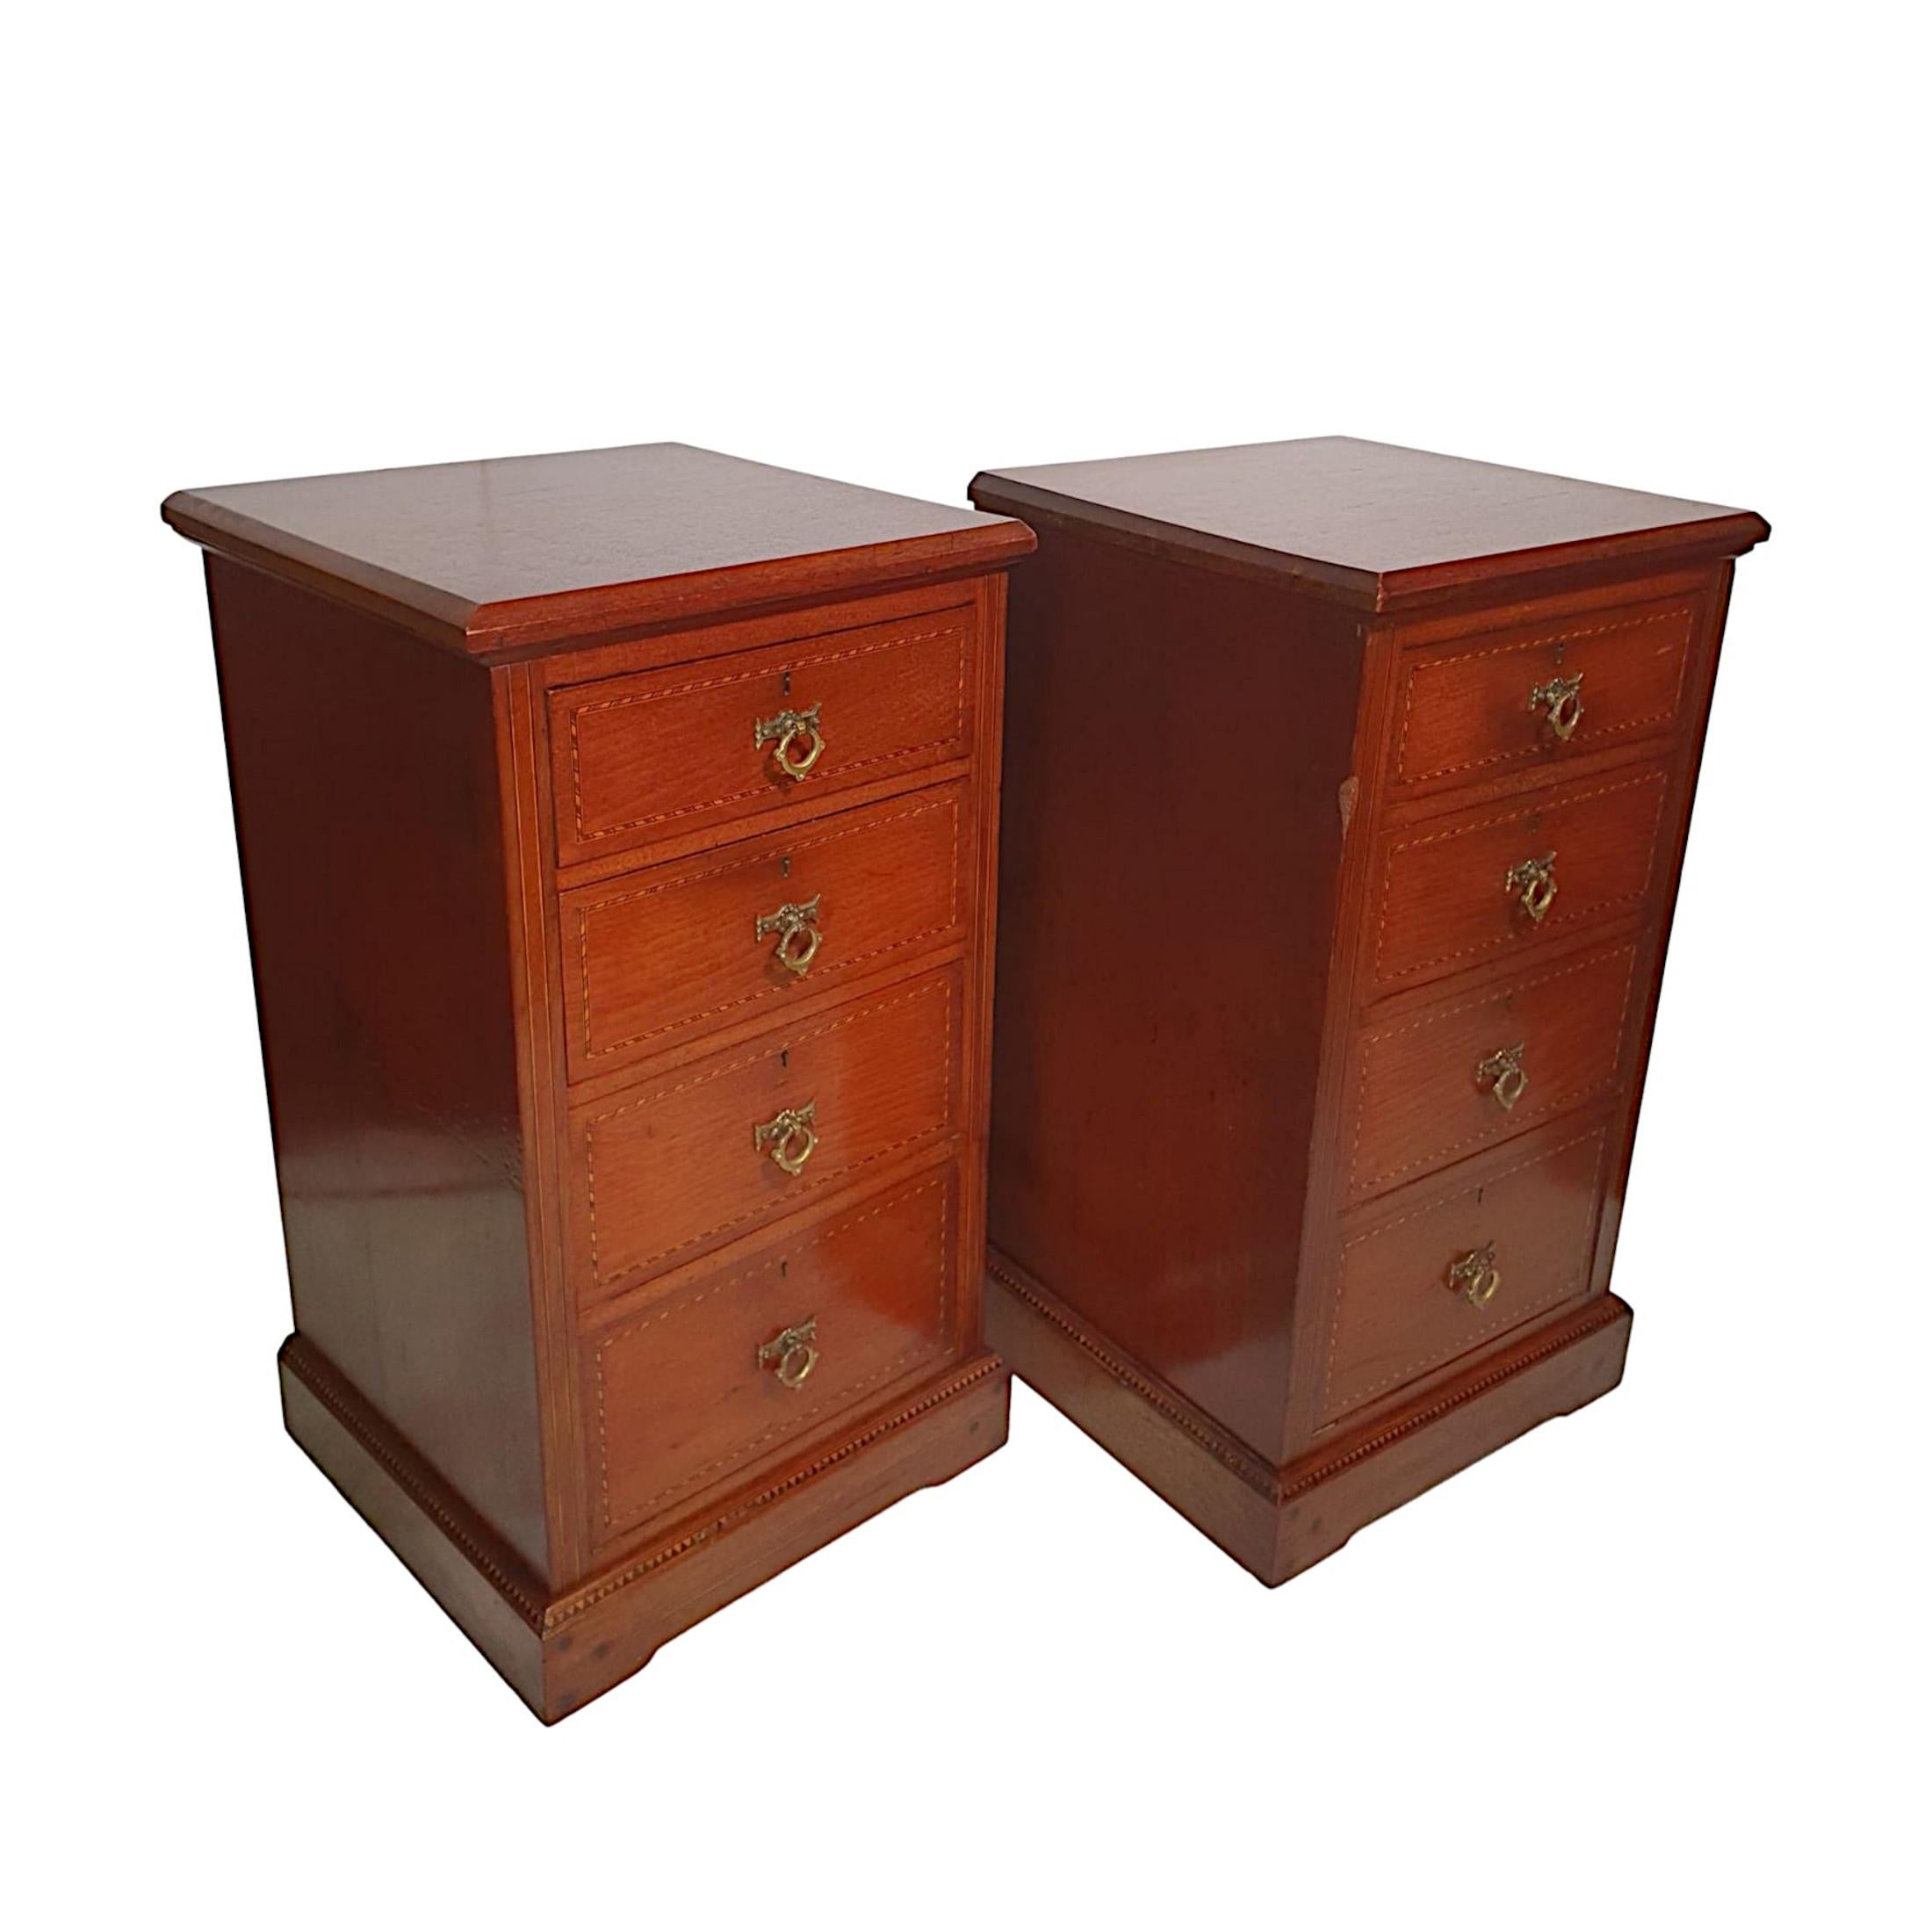 A lovely quality pair of 19th century walnut inlaid bedside chests. The moulded top raised over four graduated, line inlaid drawers fitted with brass escutcheons and decorative ring pulls, supported on inlaid platform base.